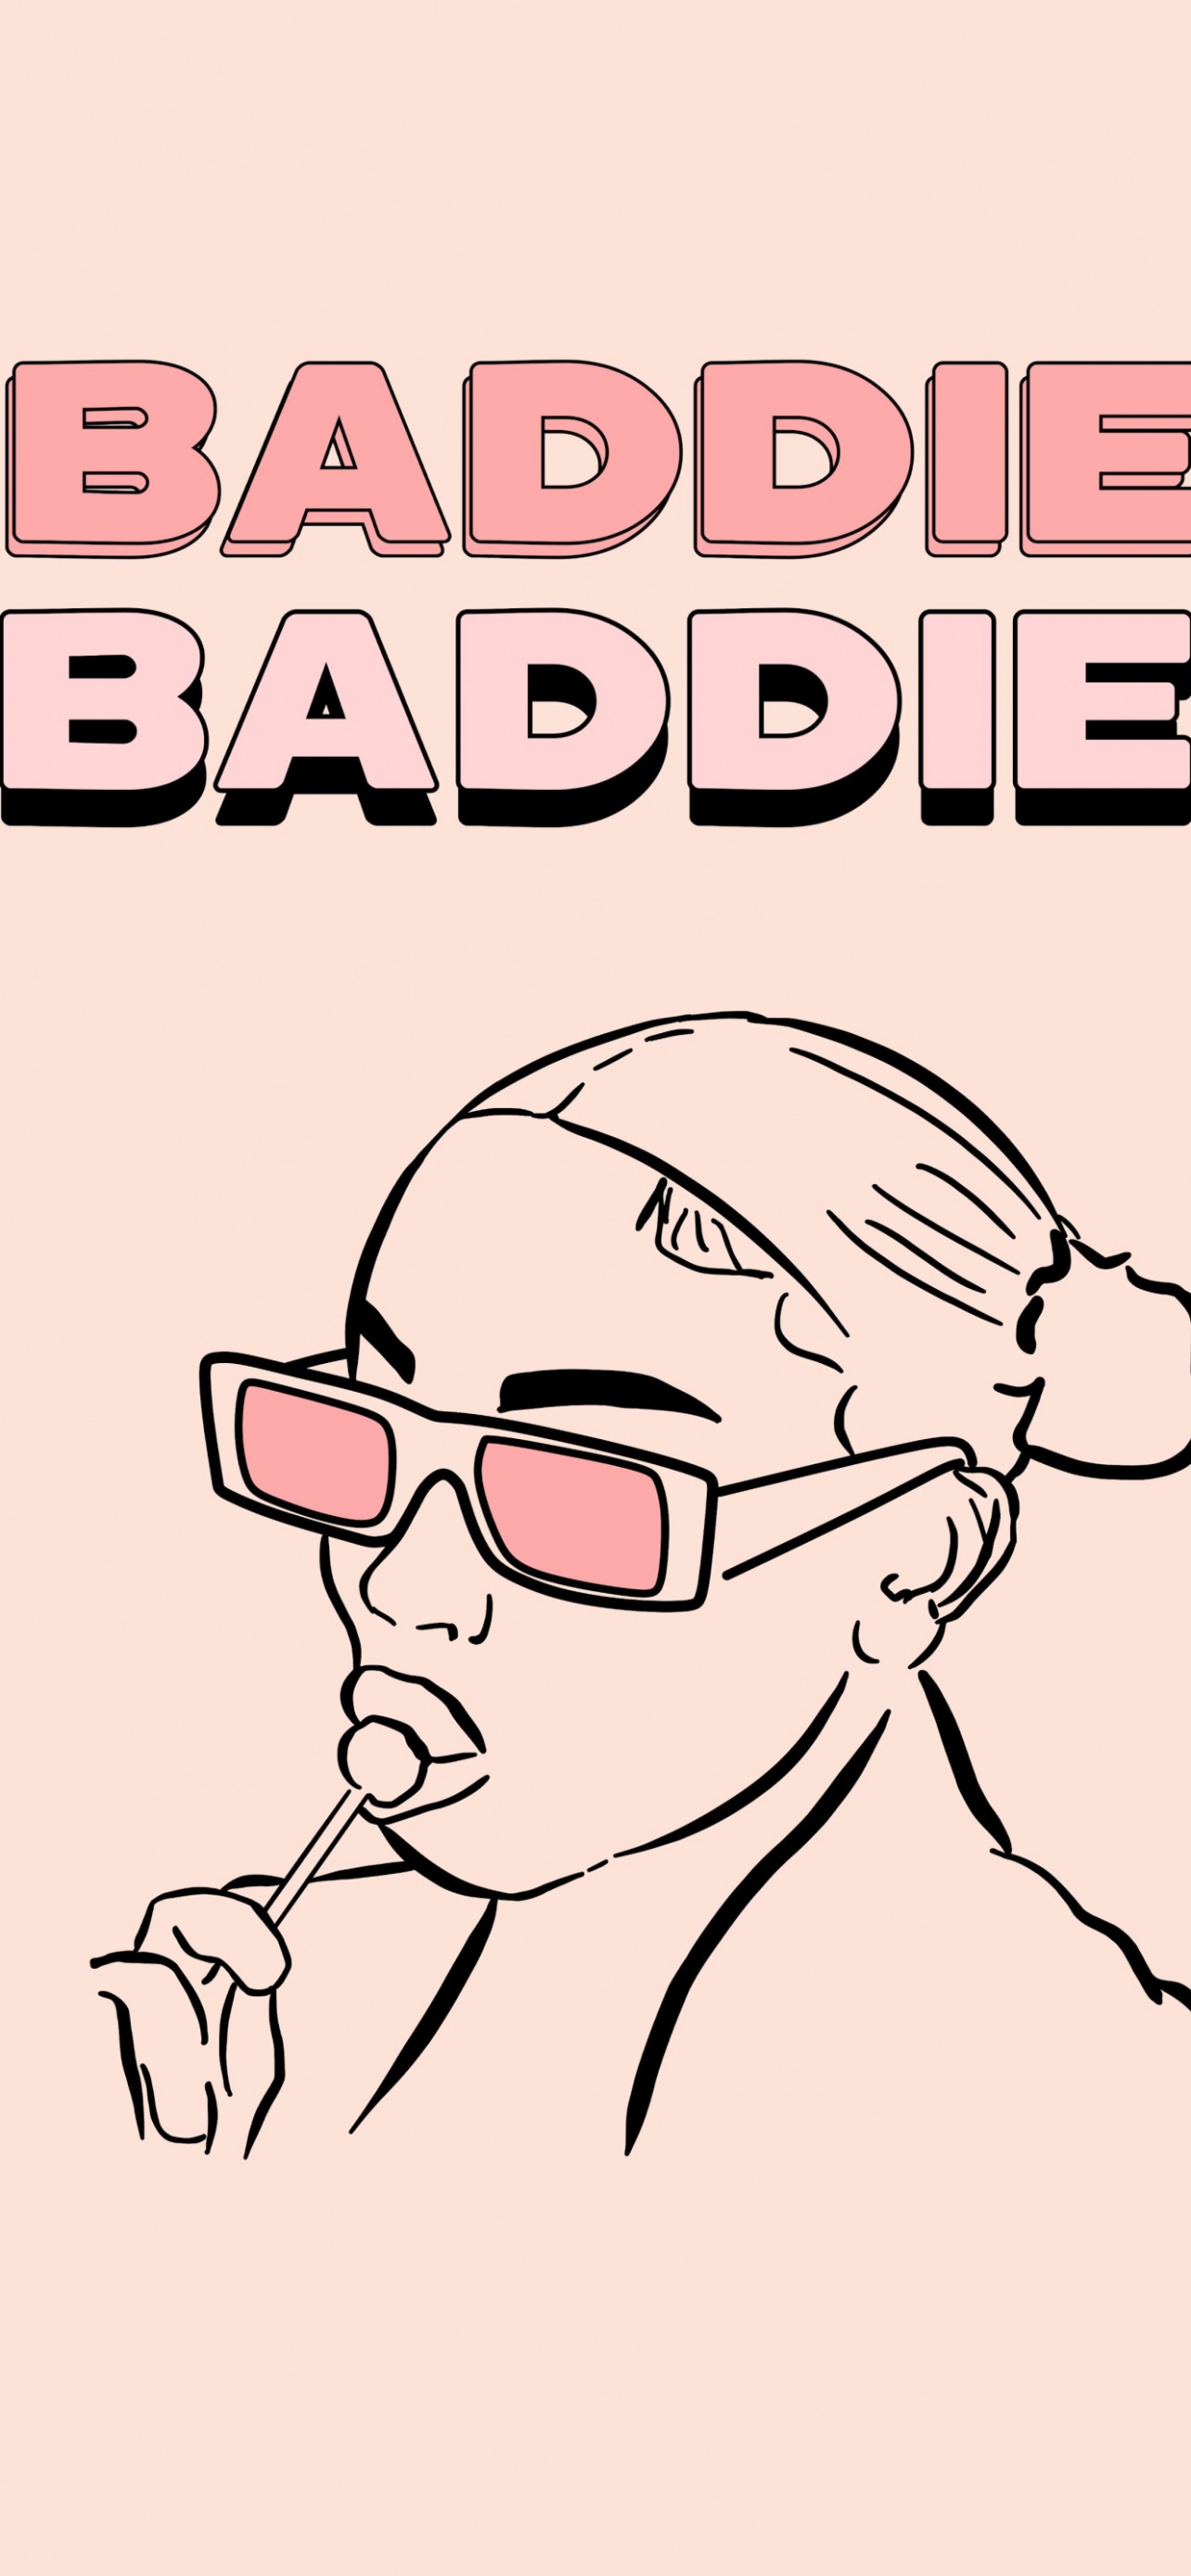 Baddie Aesthetic HD Wallpapers 1000 Free Baddie Aesthetic Wallpaper  Images For All Devices